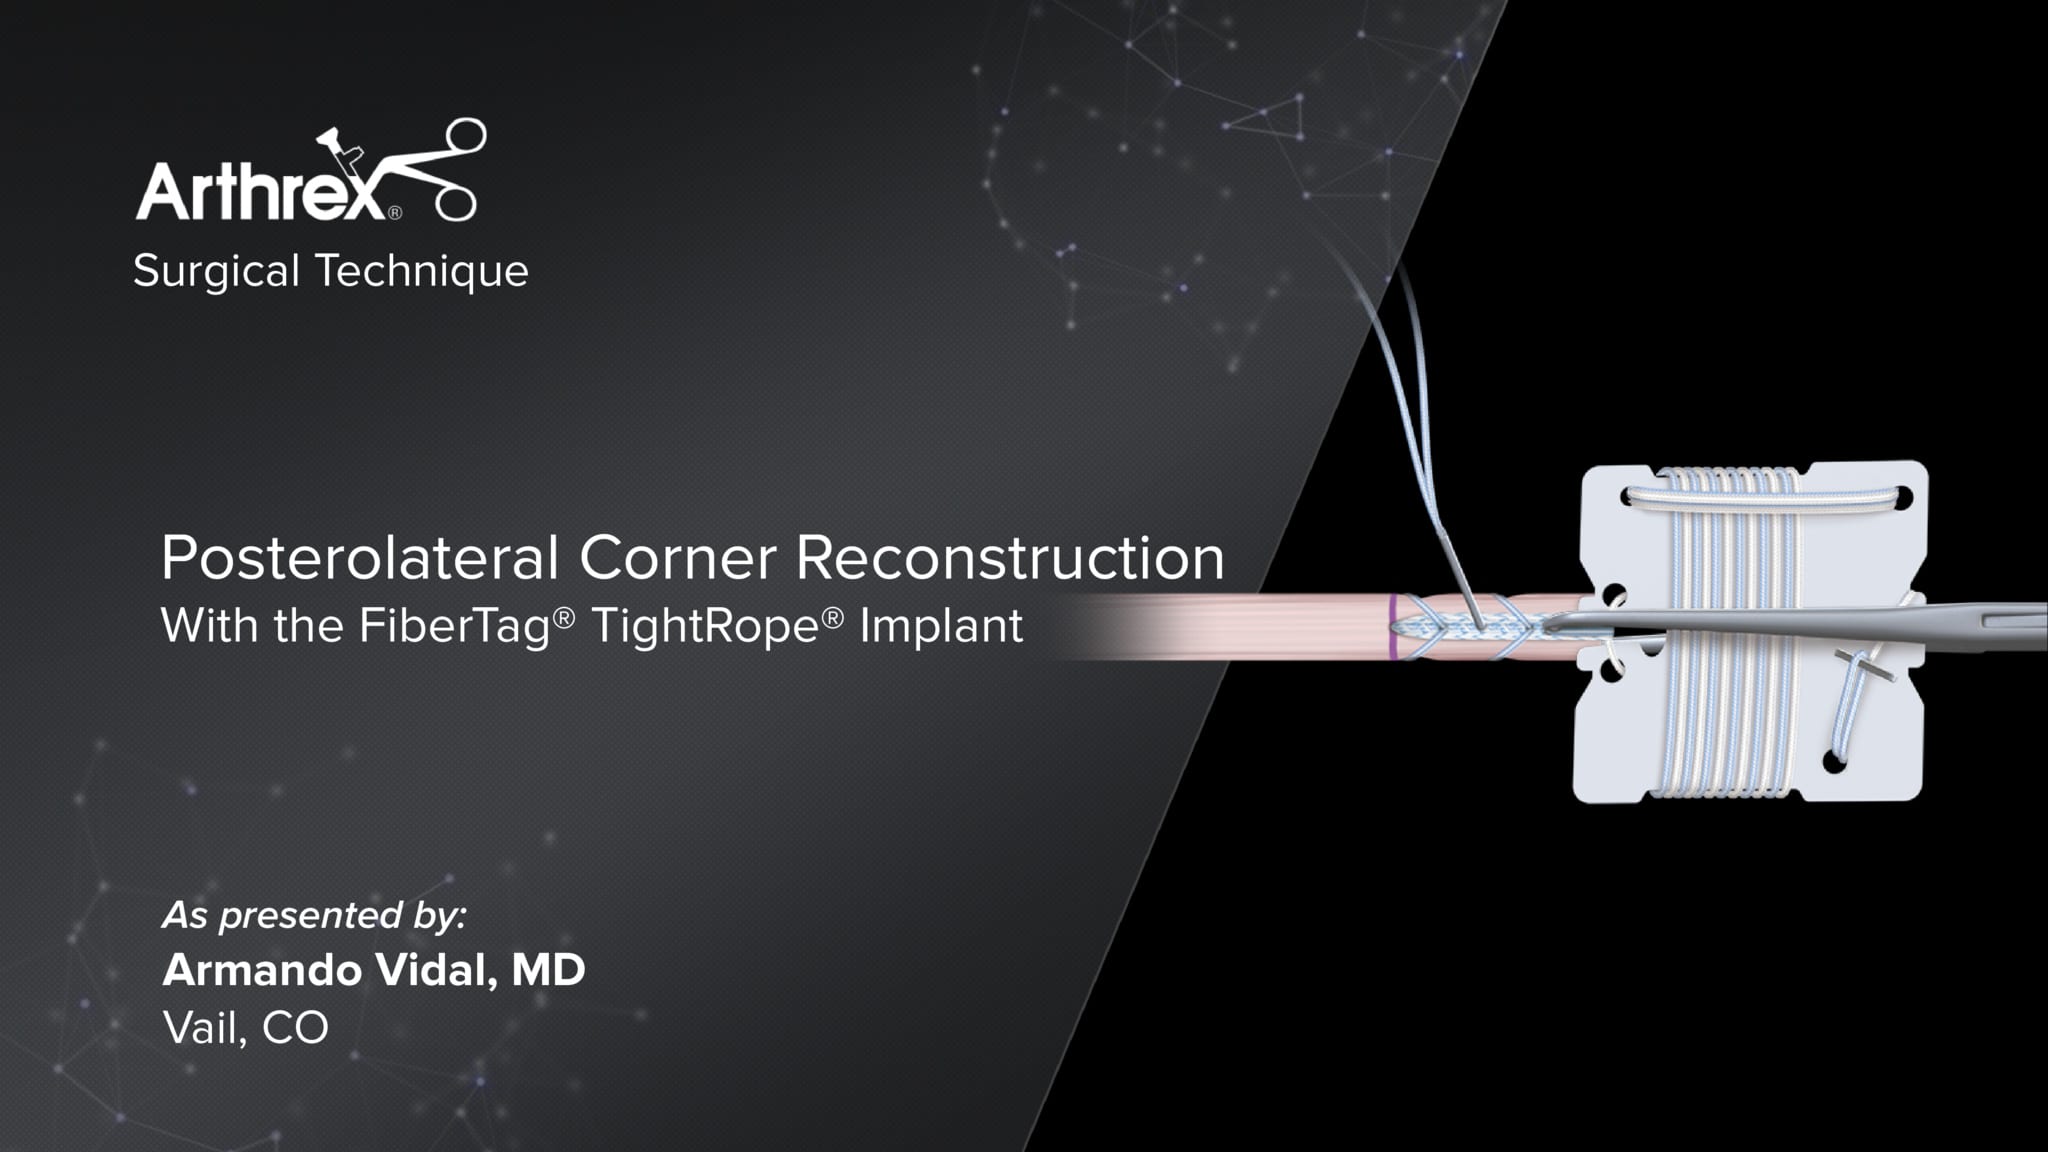 Posterolateral Corner Reconstruction With the FiberTag® TightRope® Implant